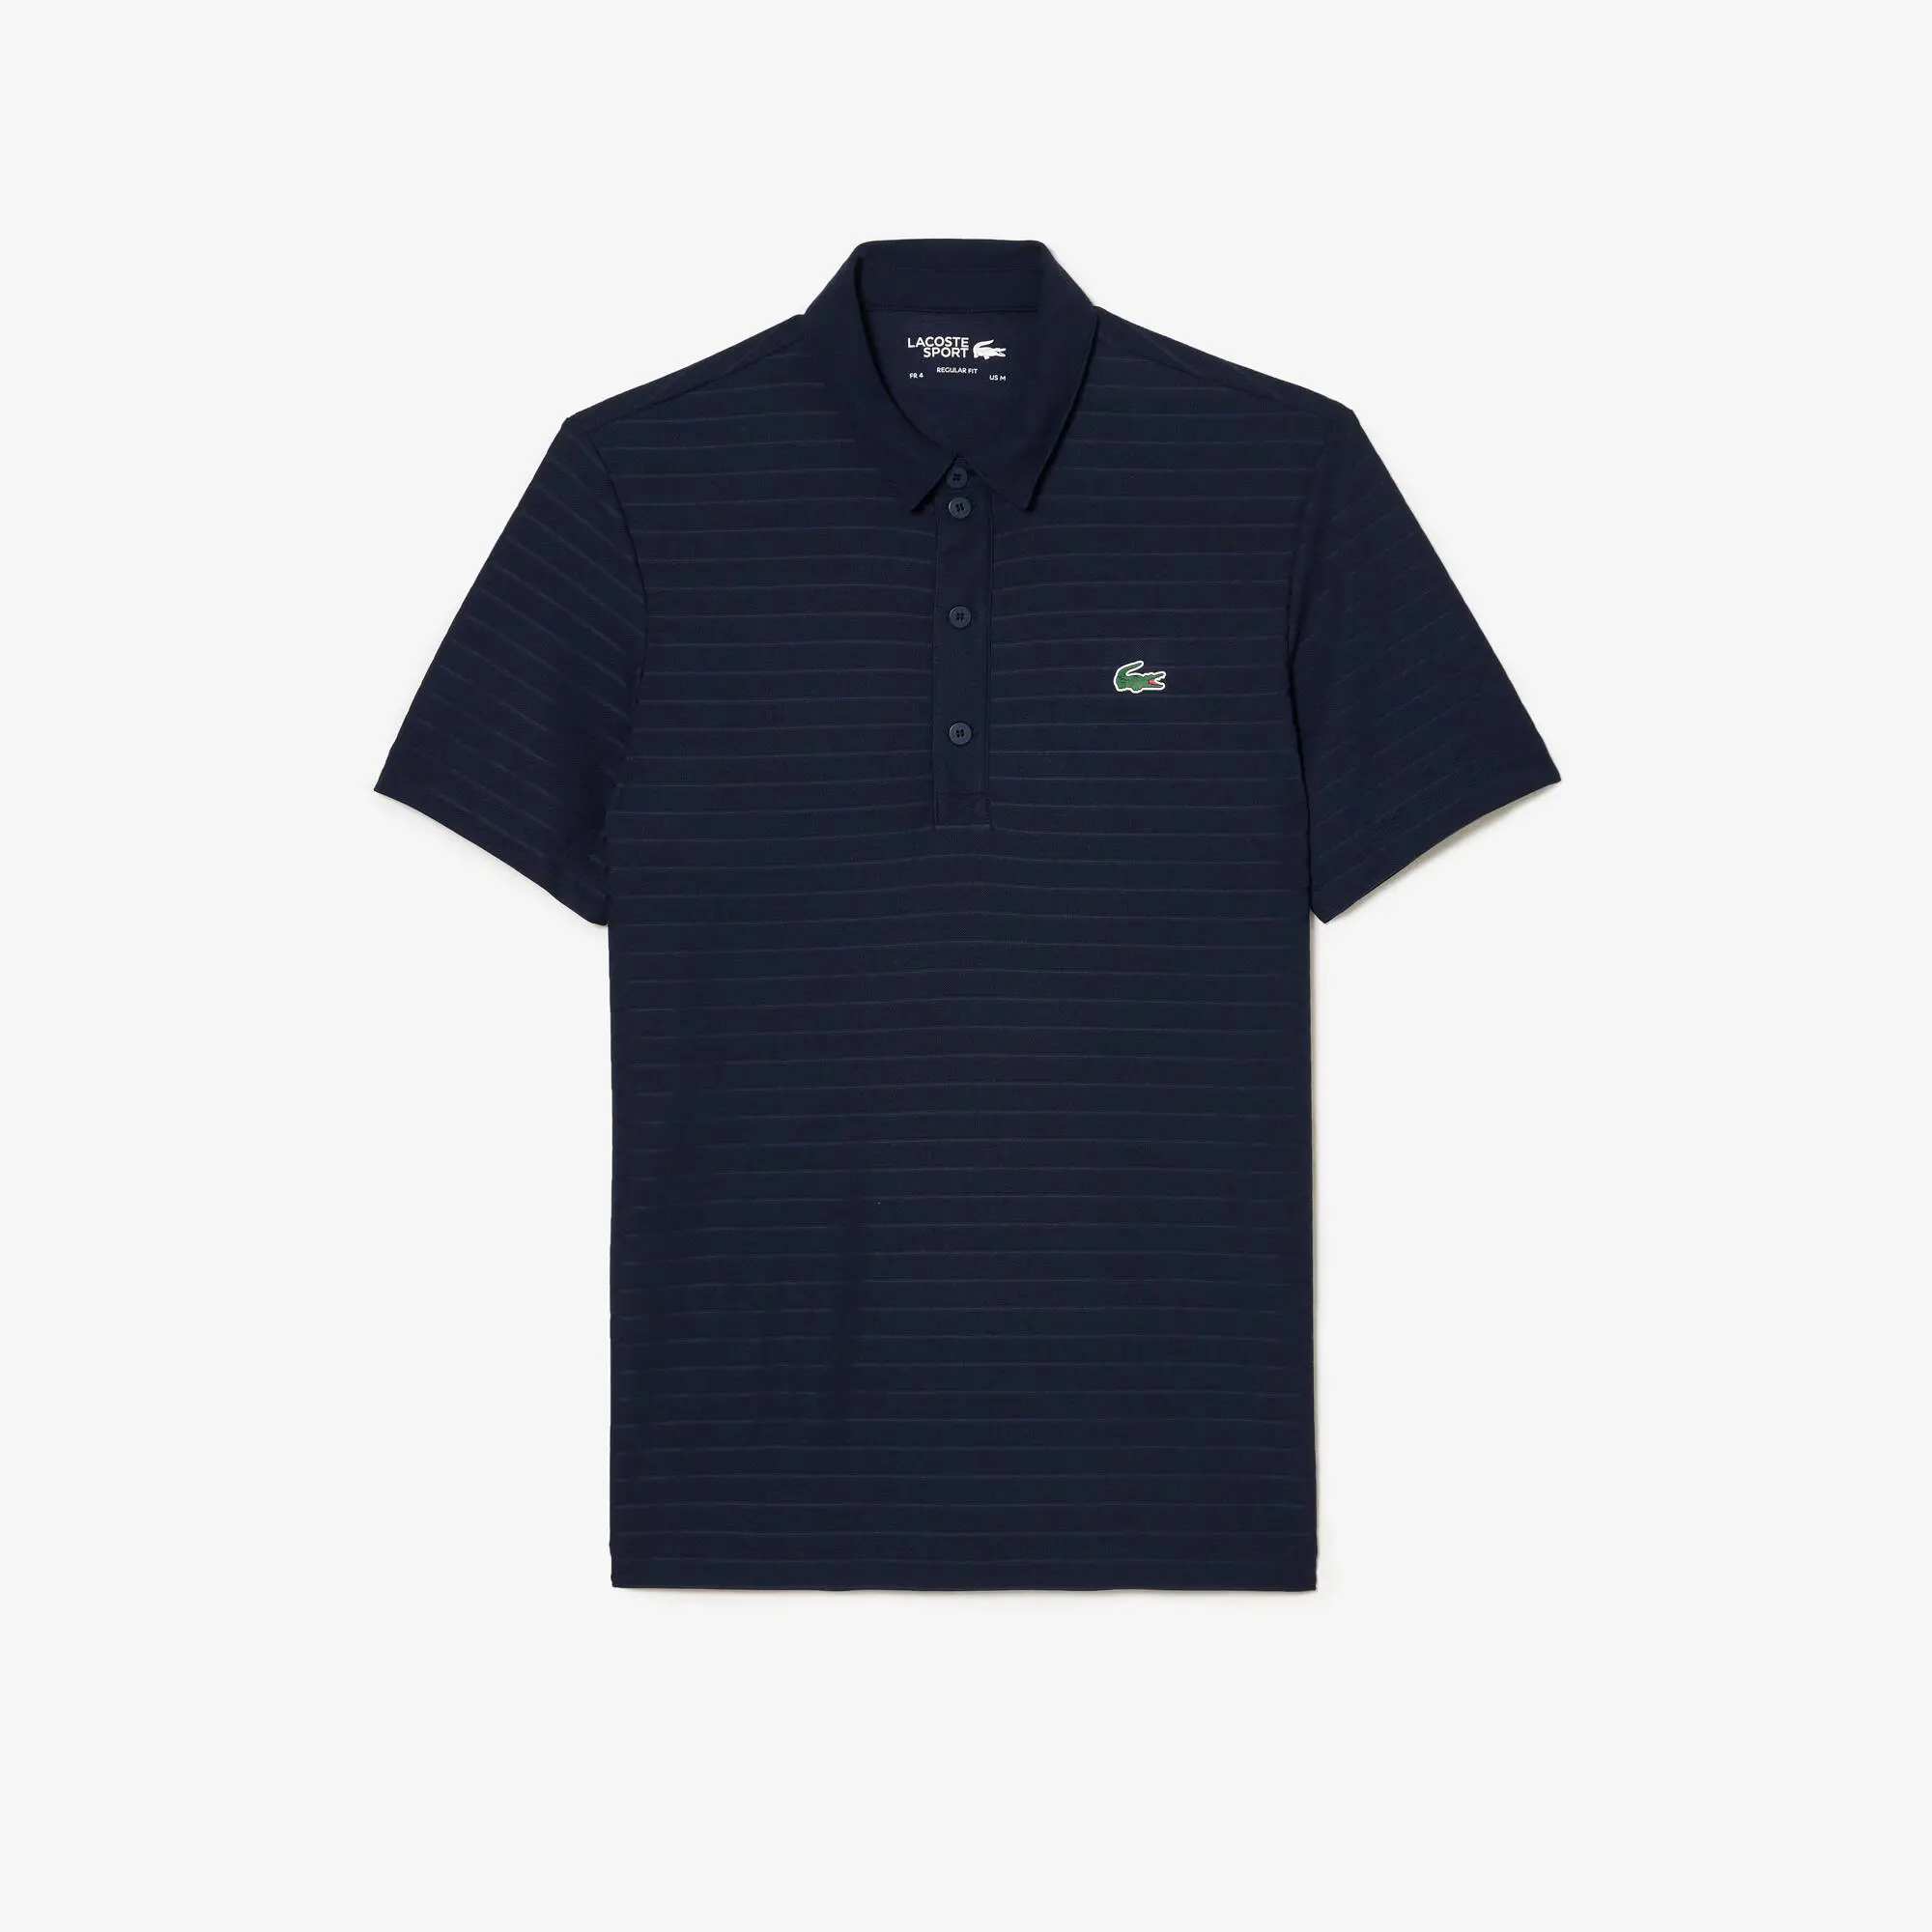 Lacoste Men's Lacoste SPORT Textured Breathable Golf Polo Shirt. 2